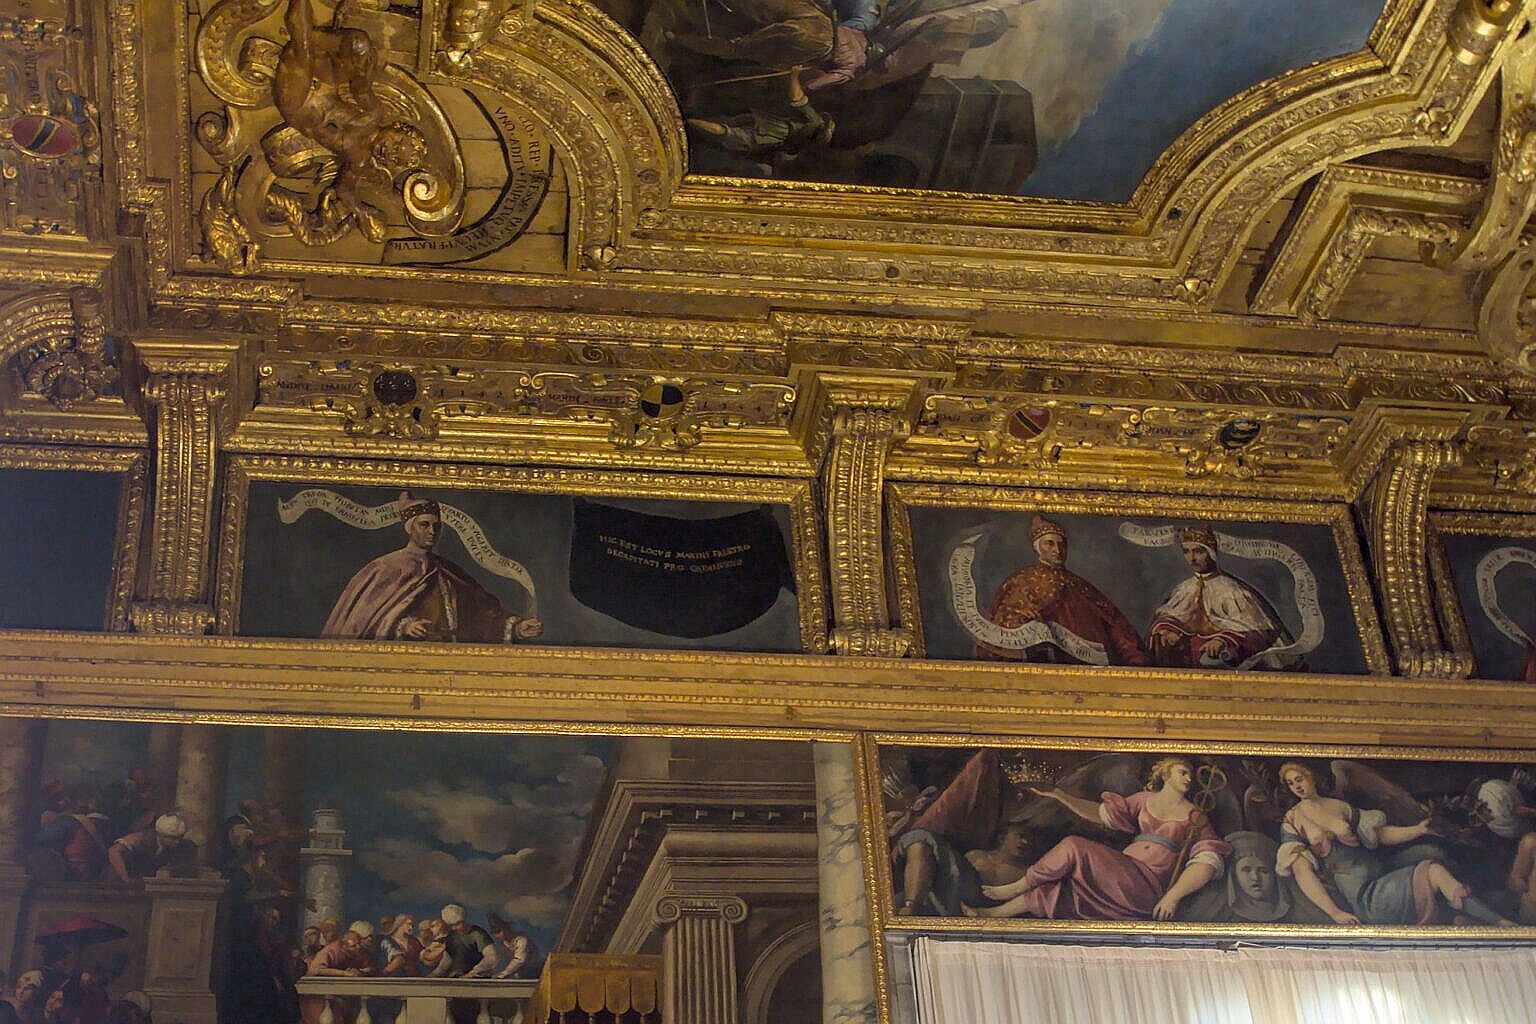 Marin Falier's portrait is missing in the Palazzo Ducale